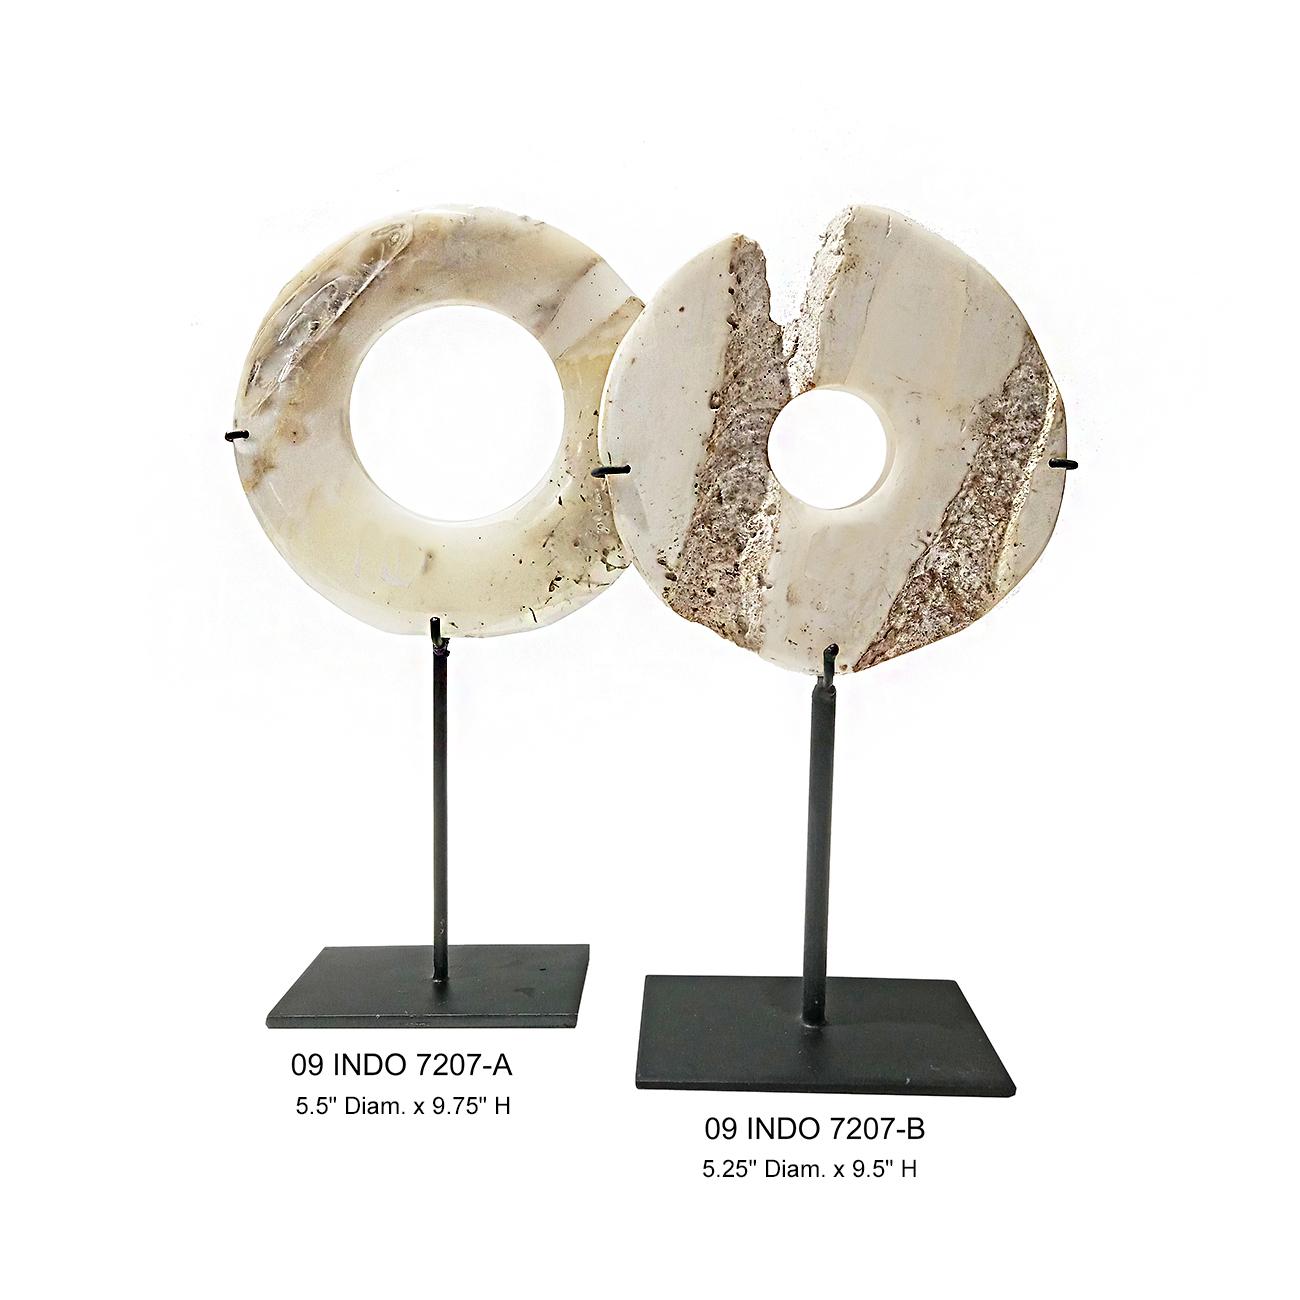 Two beautiful stone disks, hand-carved in Indonesia. Mounted on black metal stands. 

The largest disk is 5.5 inches diameter, 2.5 inches deep and 9.75 inches high (mounted). The smaller disk is 5.25 inches diameter, 2.5 inches deep and 9.5 inches